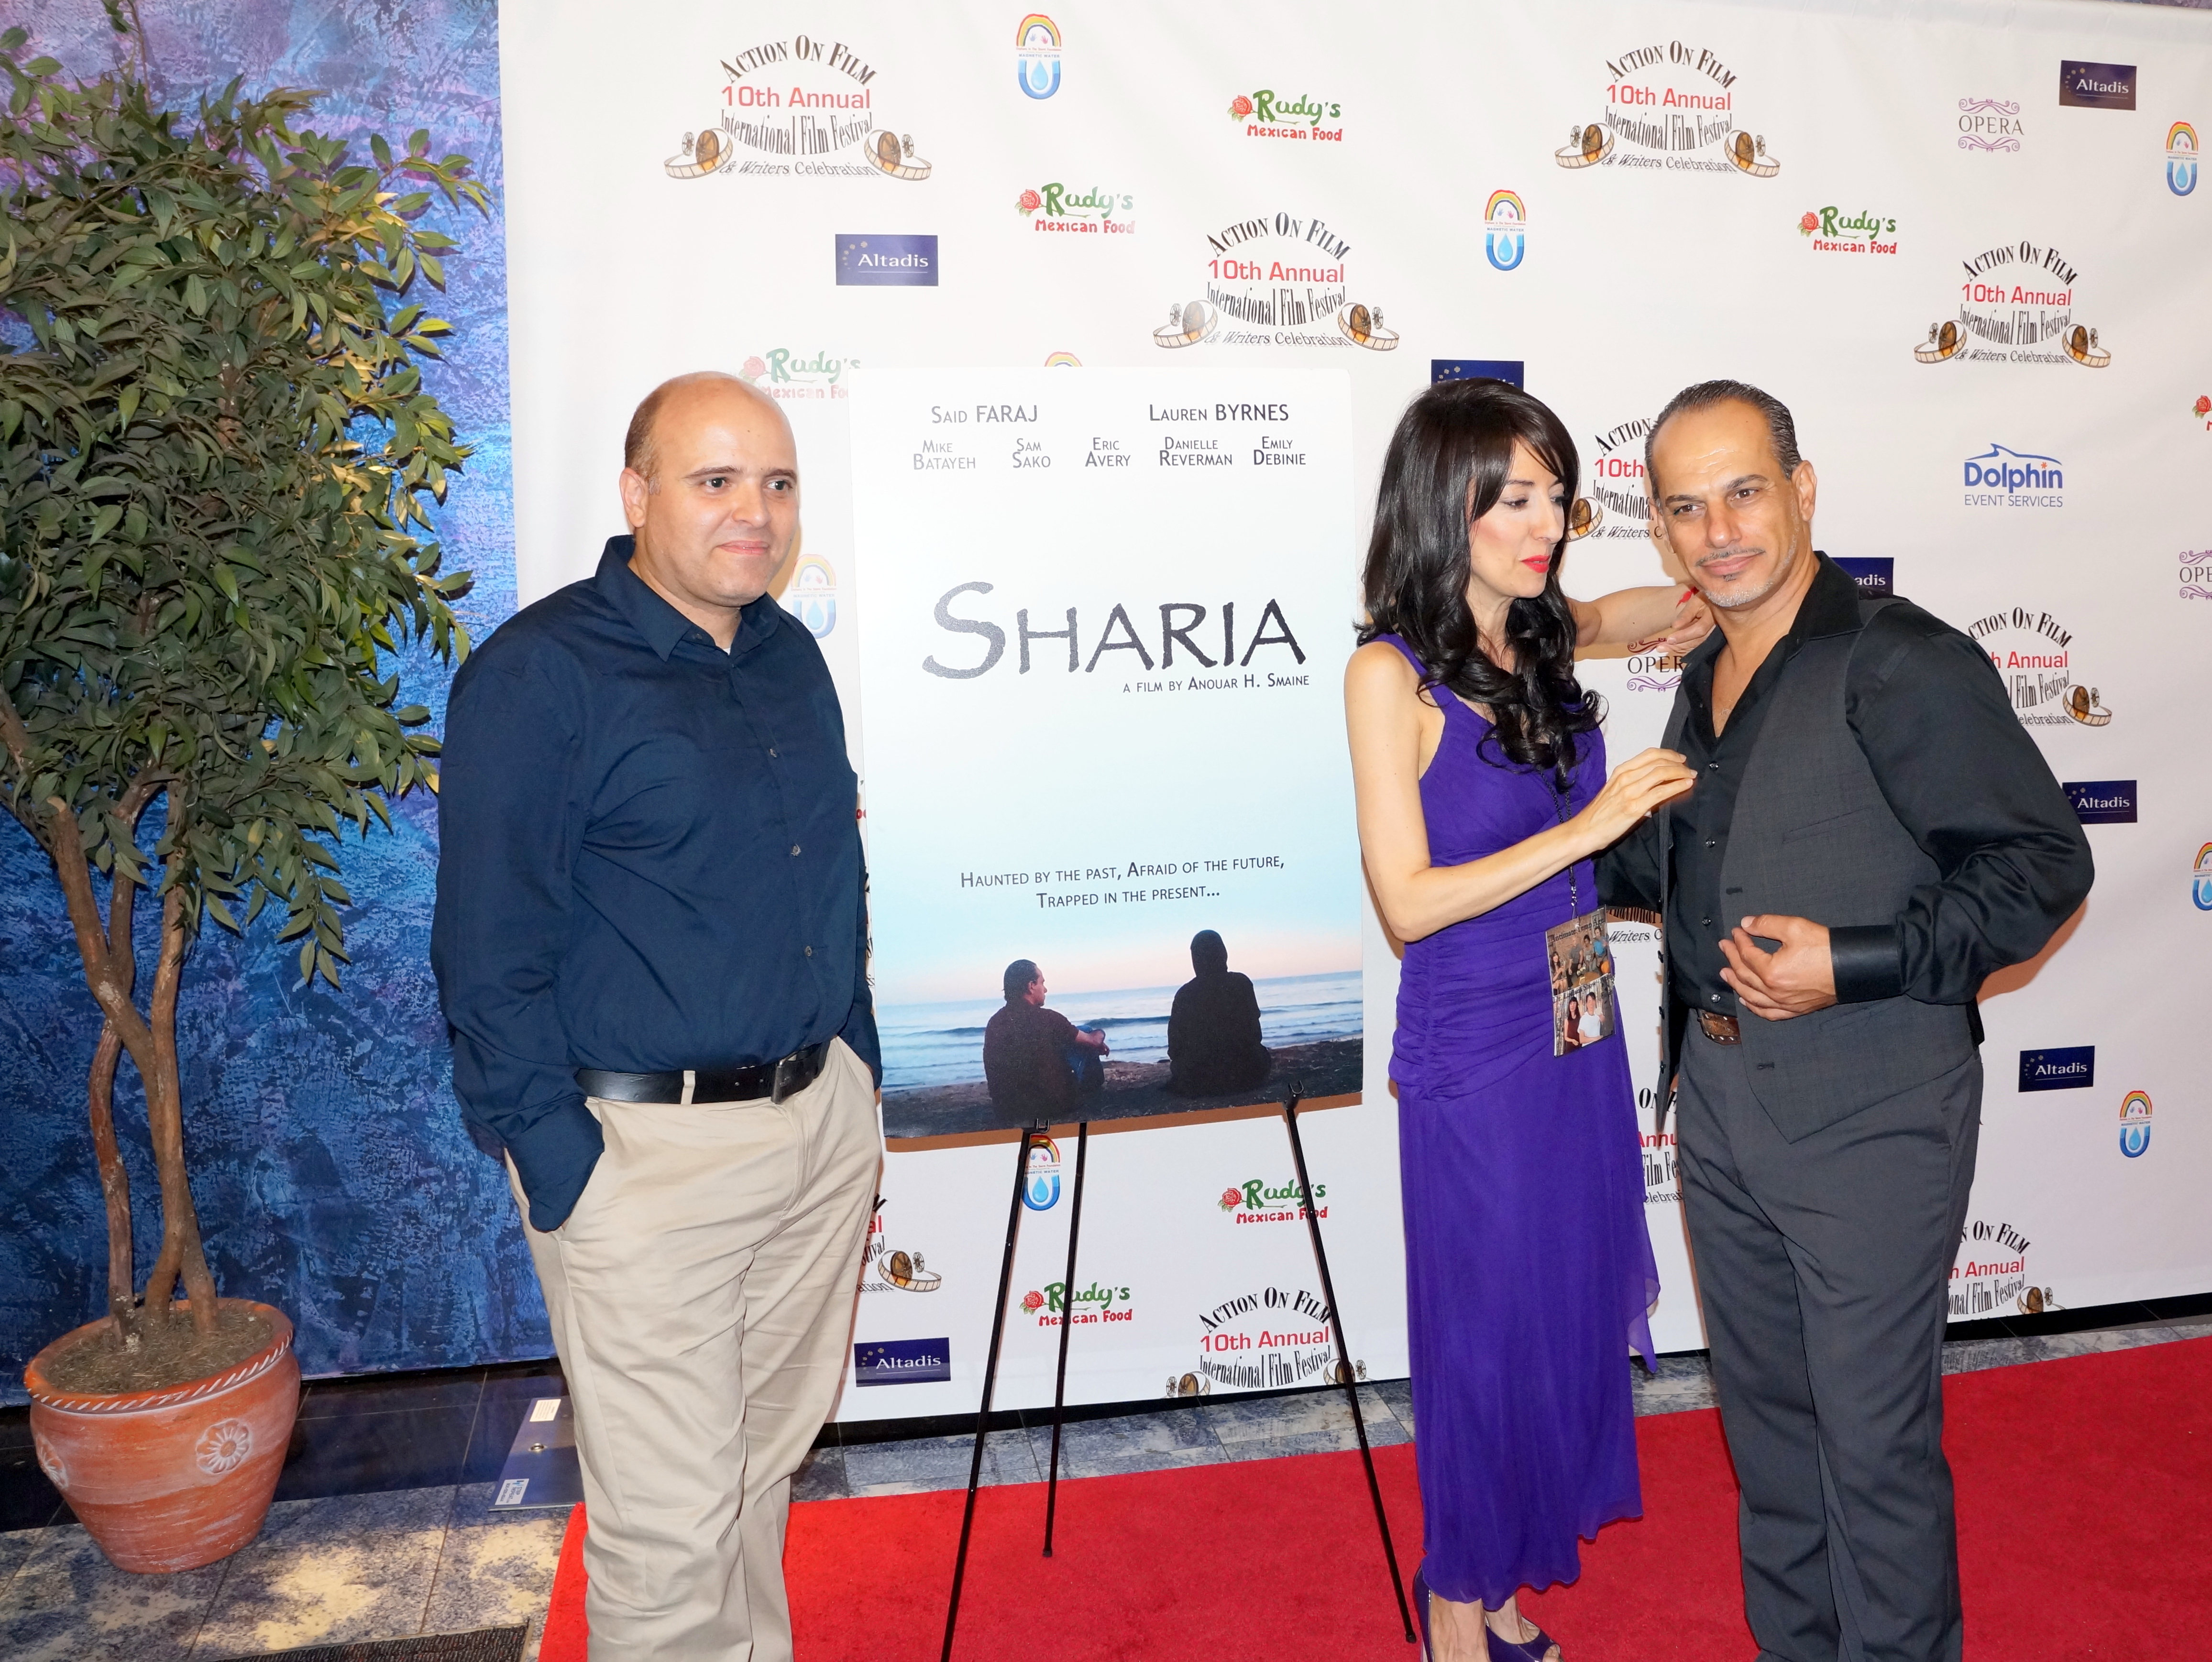 Luciana Lagana at screening event of the Action on Film International Film Festival with actor Said Faraj and director Anouar H. Smaine on 8/25/14